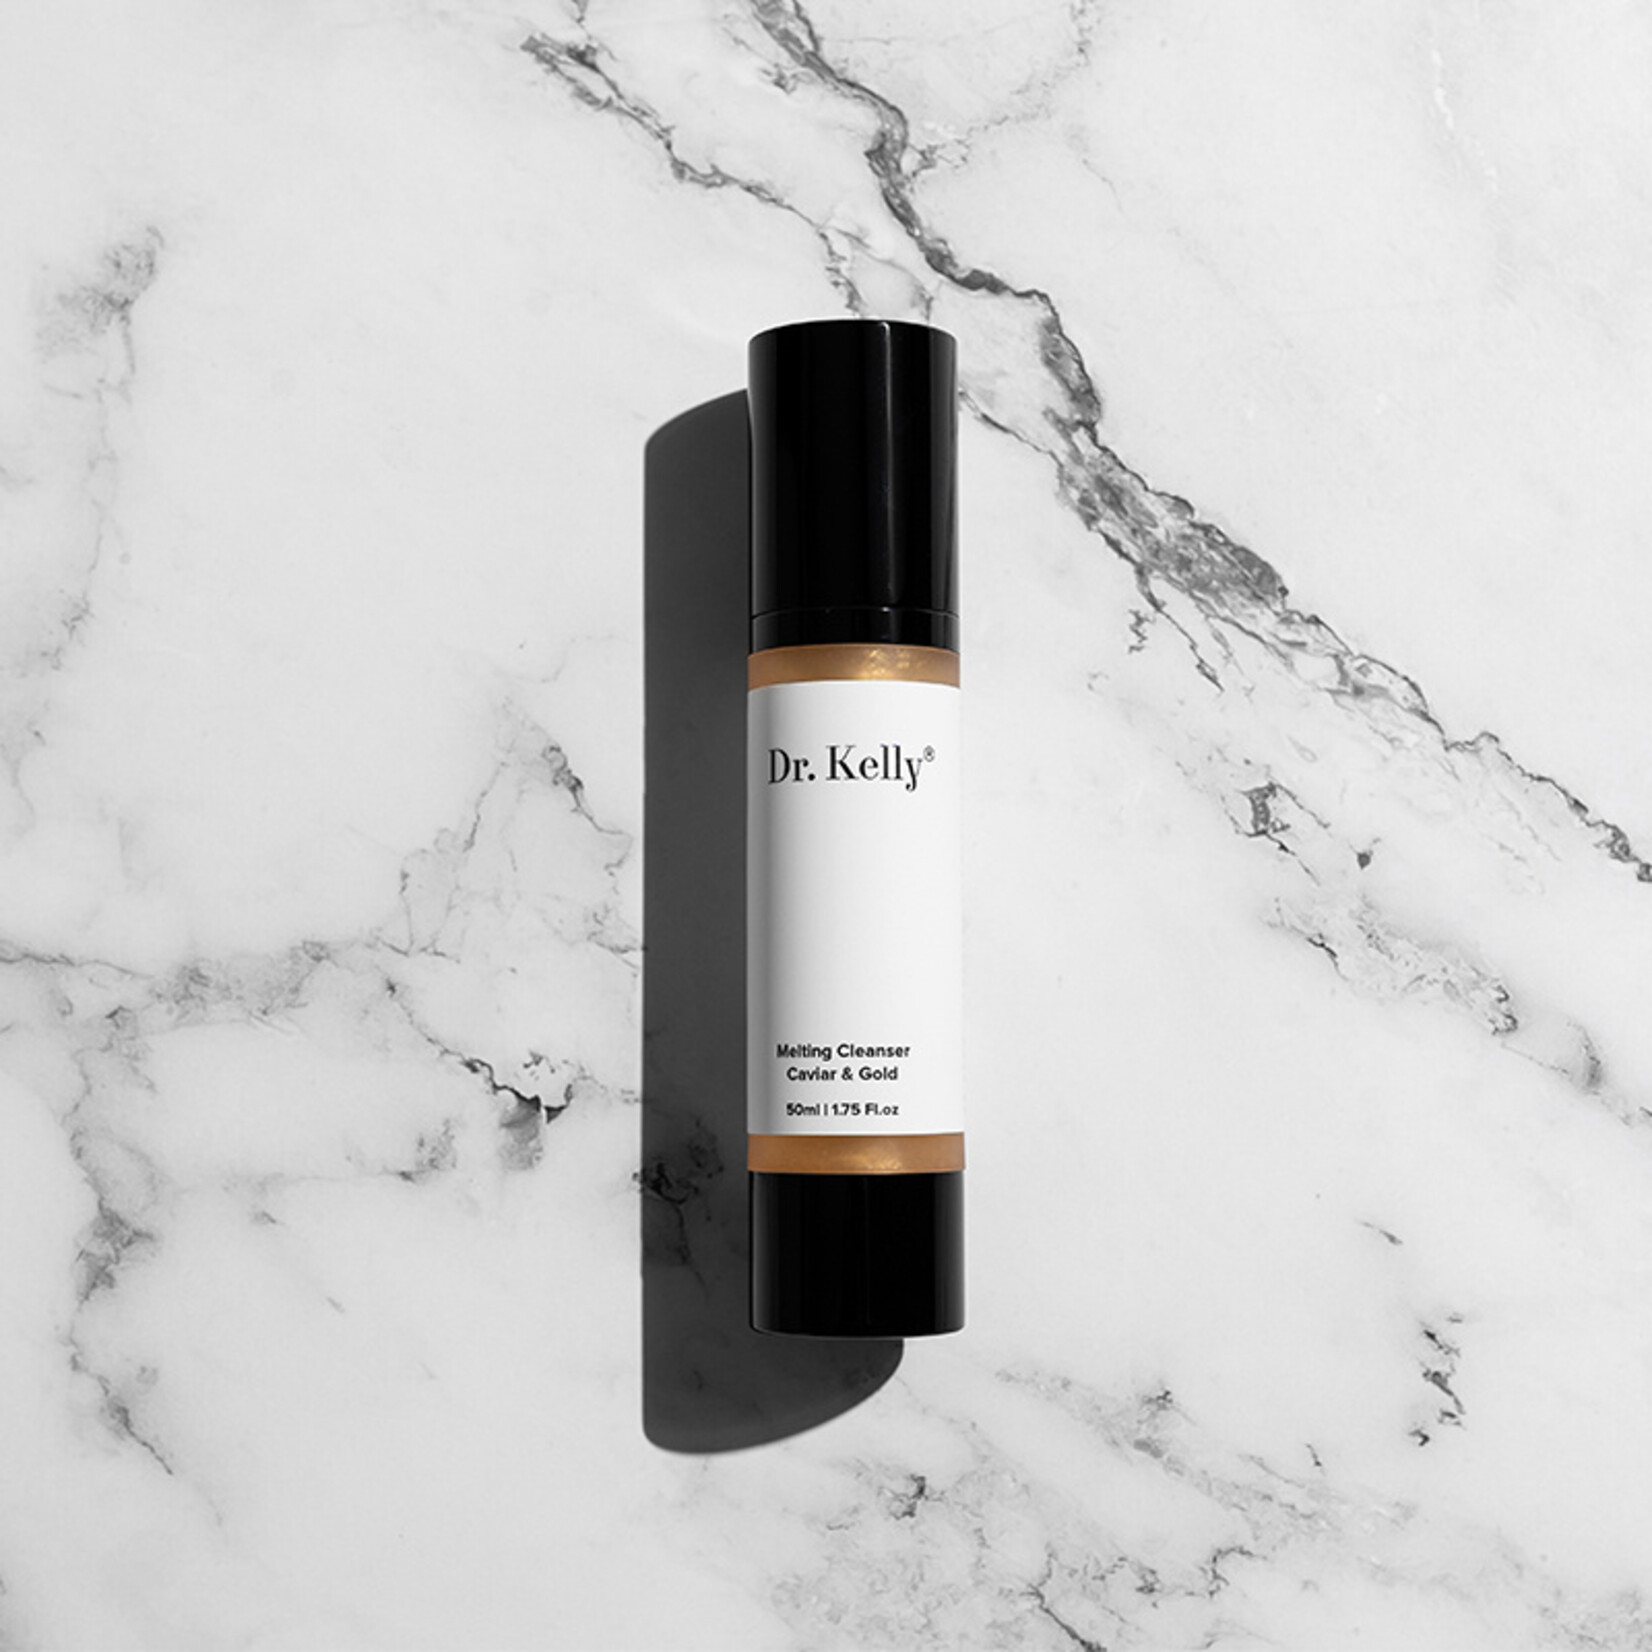 Dr. Kelly® Melting Cleanser Caviar & Gold